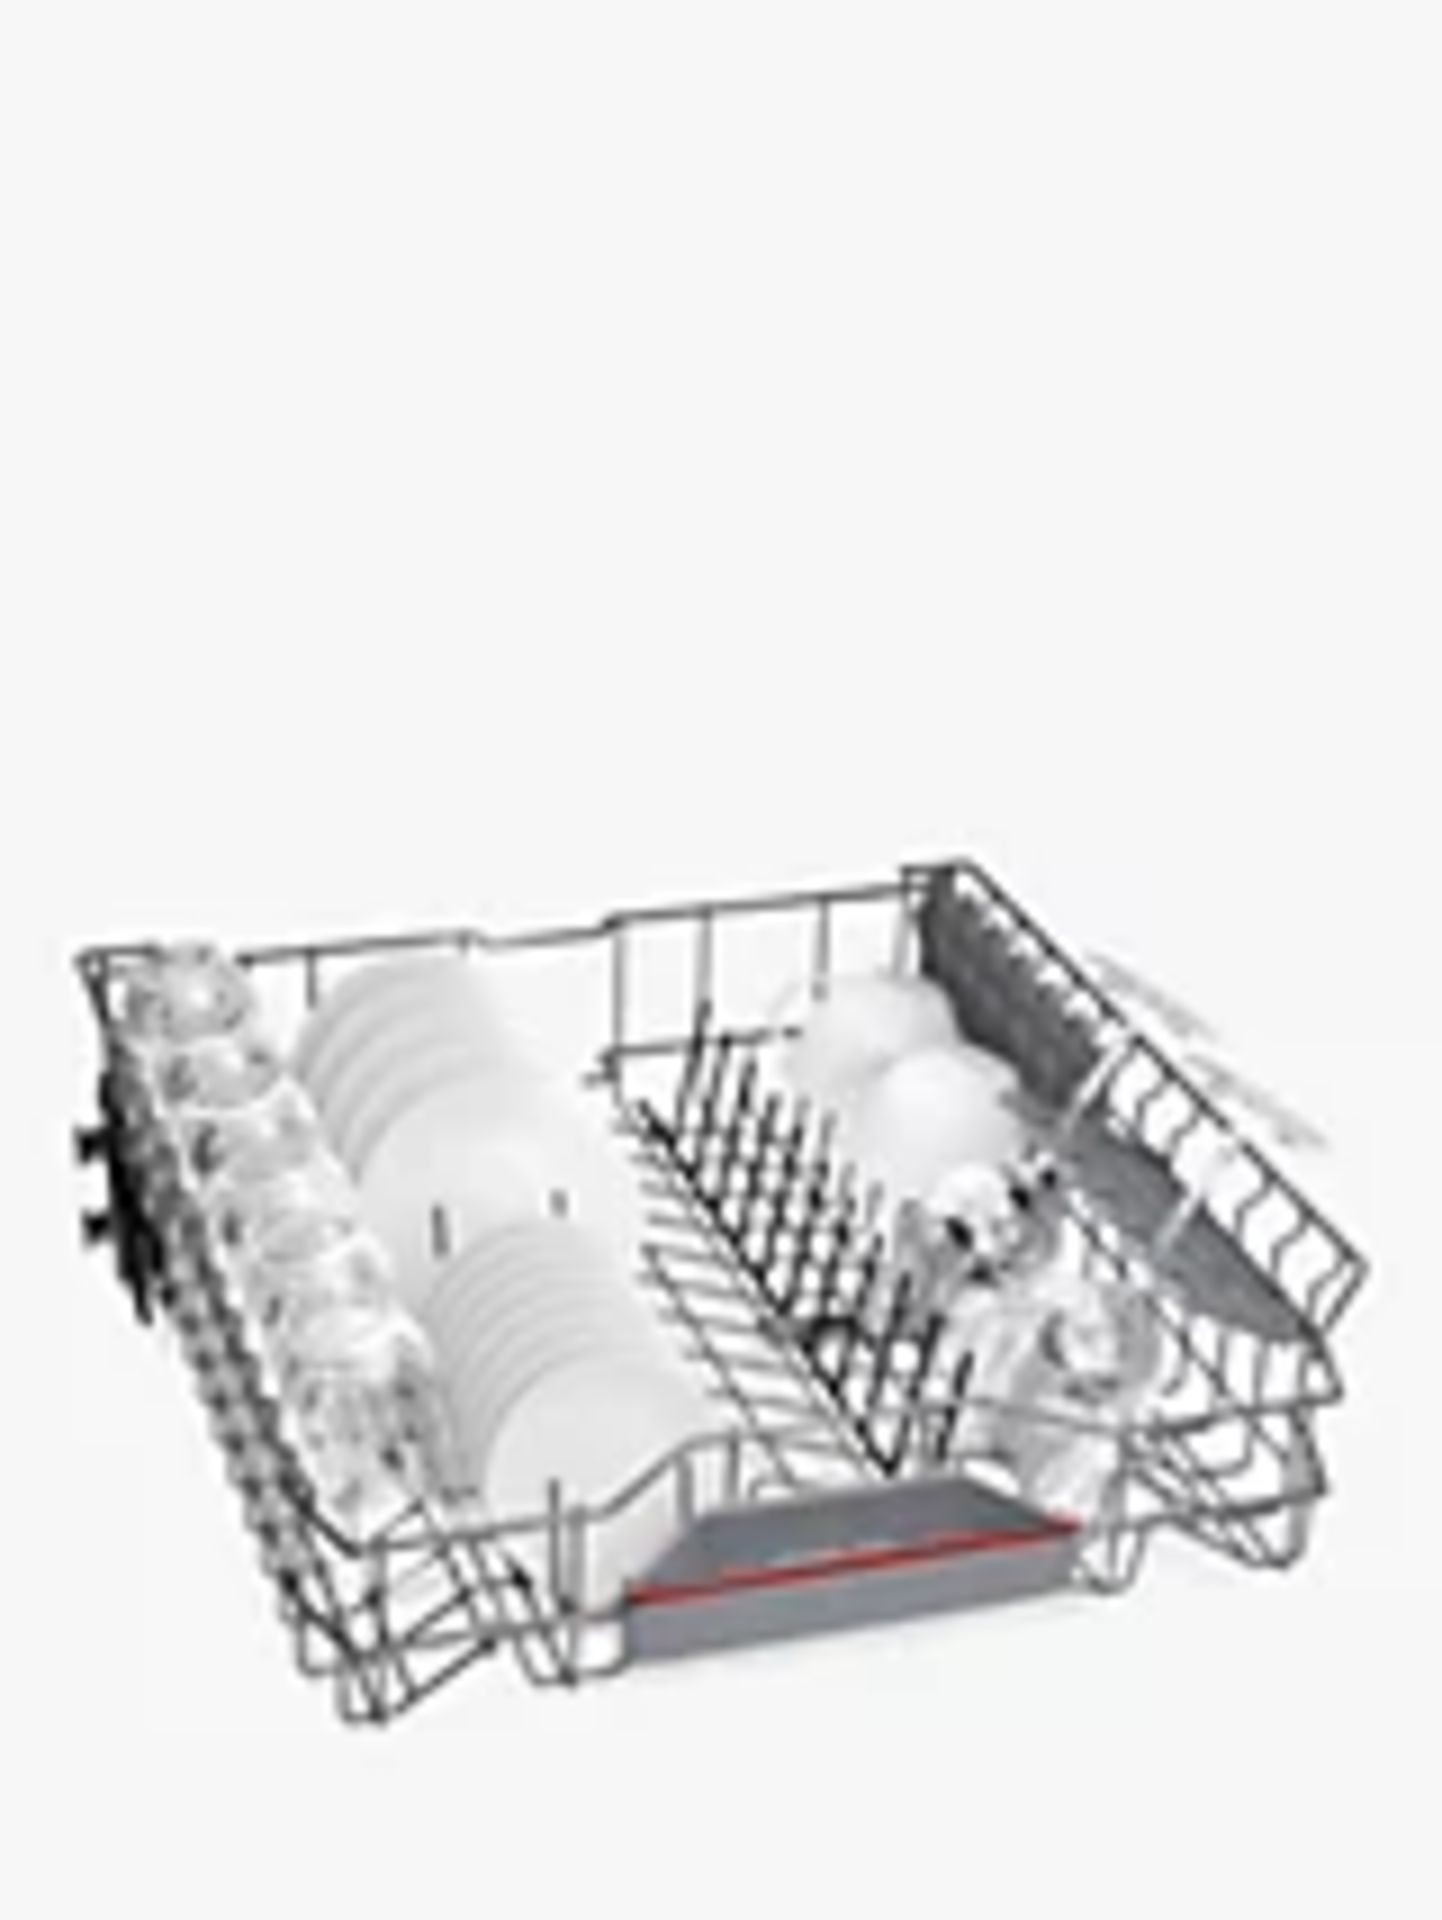 Grade B Bosch Serie 4 SGV4HCX40G Fully Integrated Dishwasher - RRP: £629 - Image 3 of 5